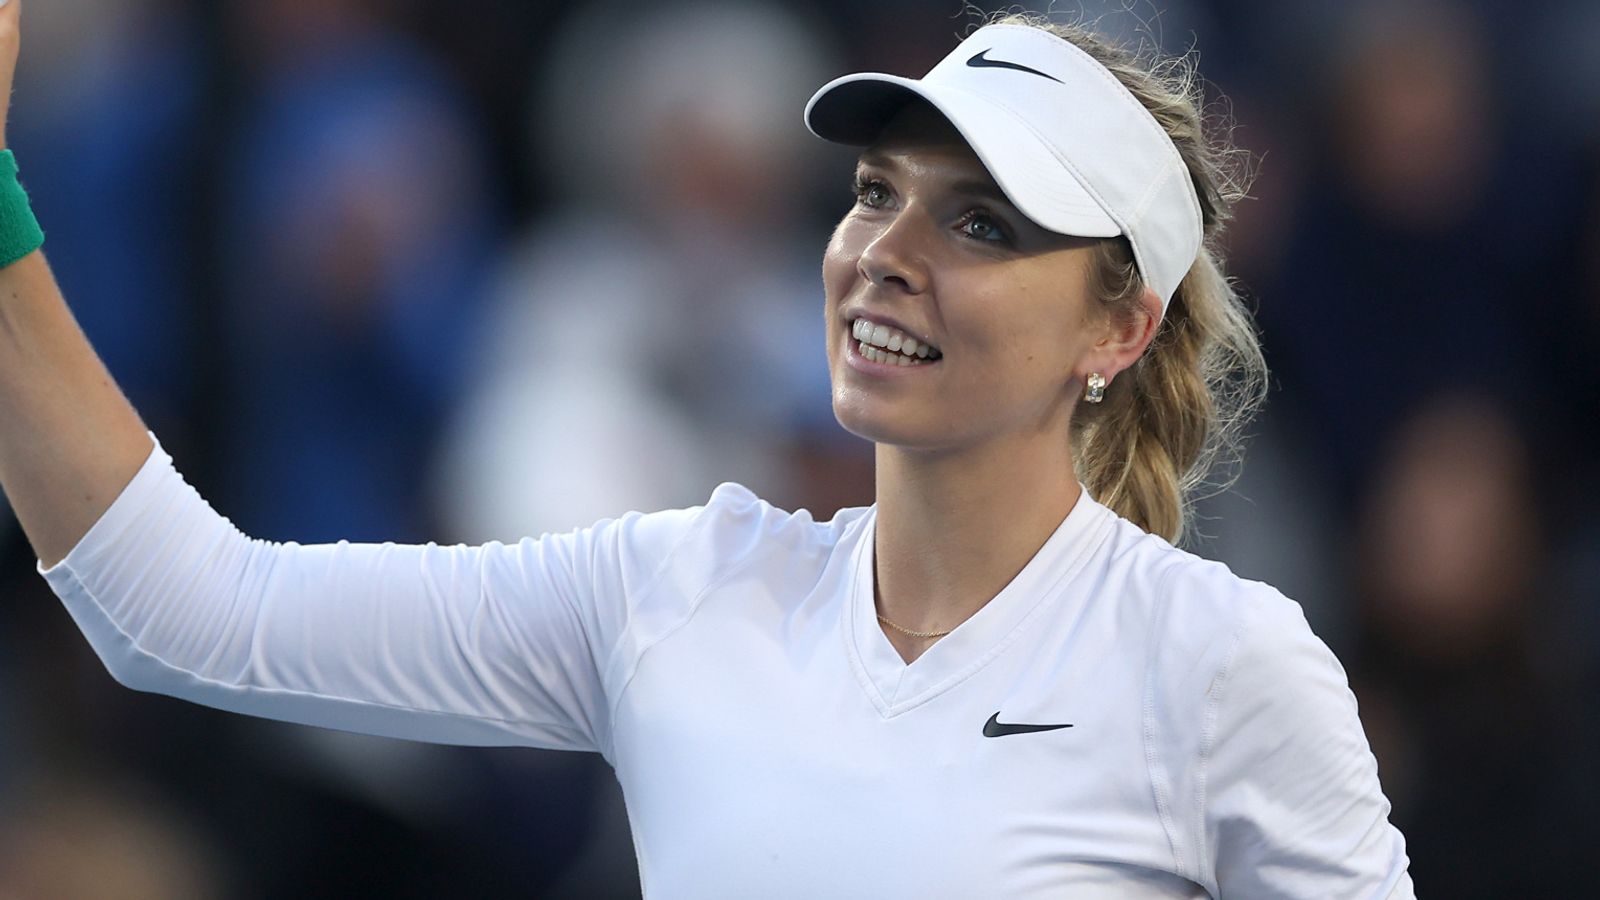 Great Britain’s Katie Boulter eases into first WTA 500 final in San Diego and into top 40 in world rankings